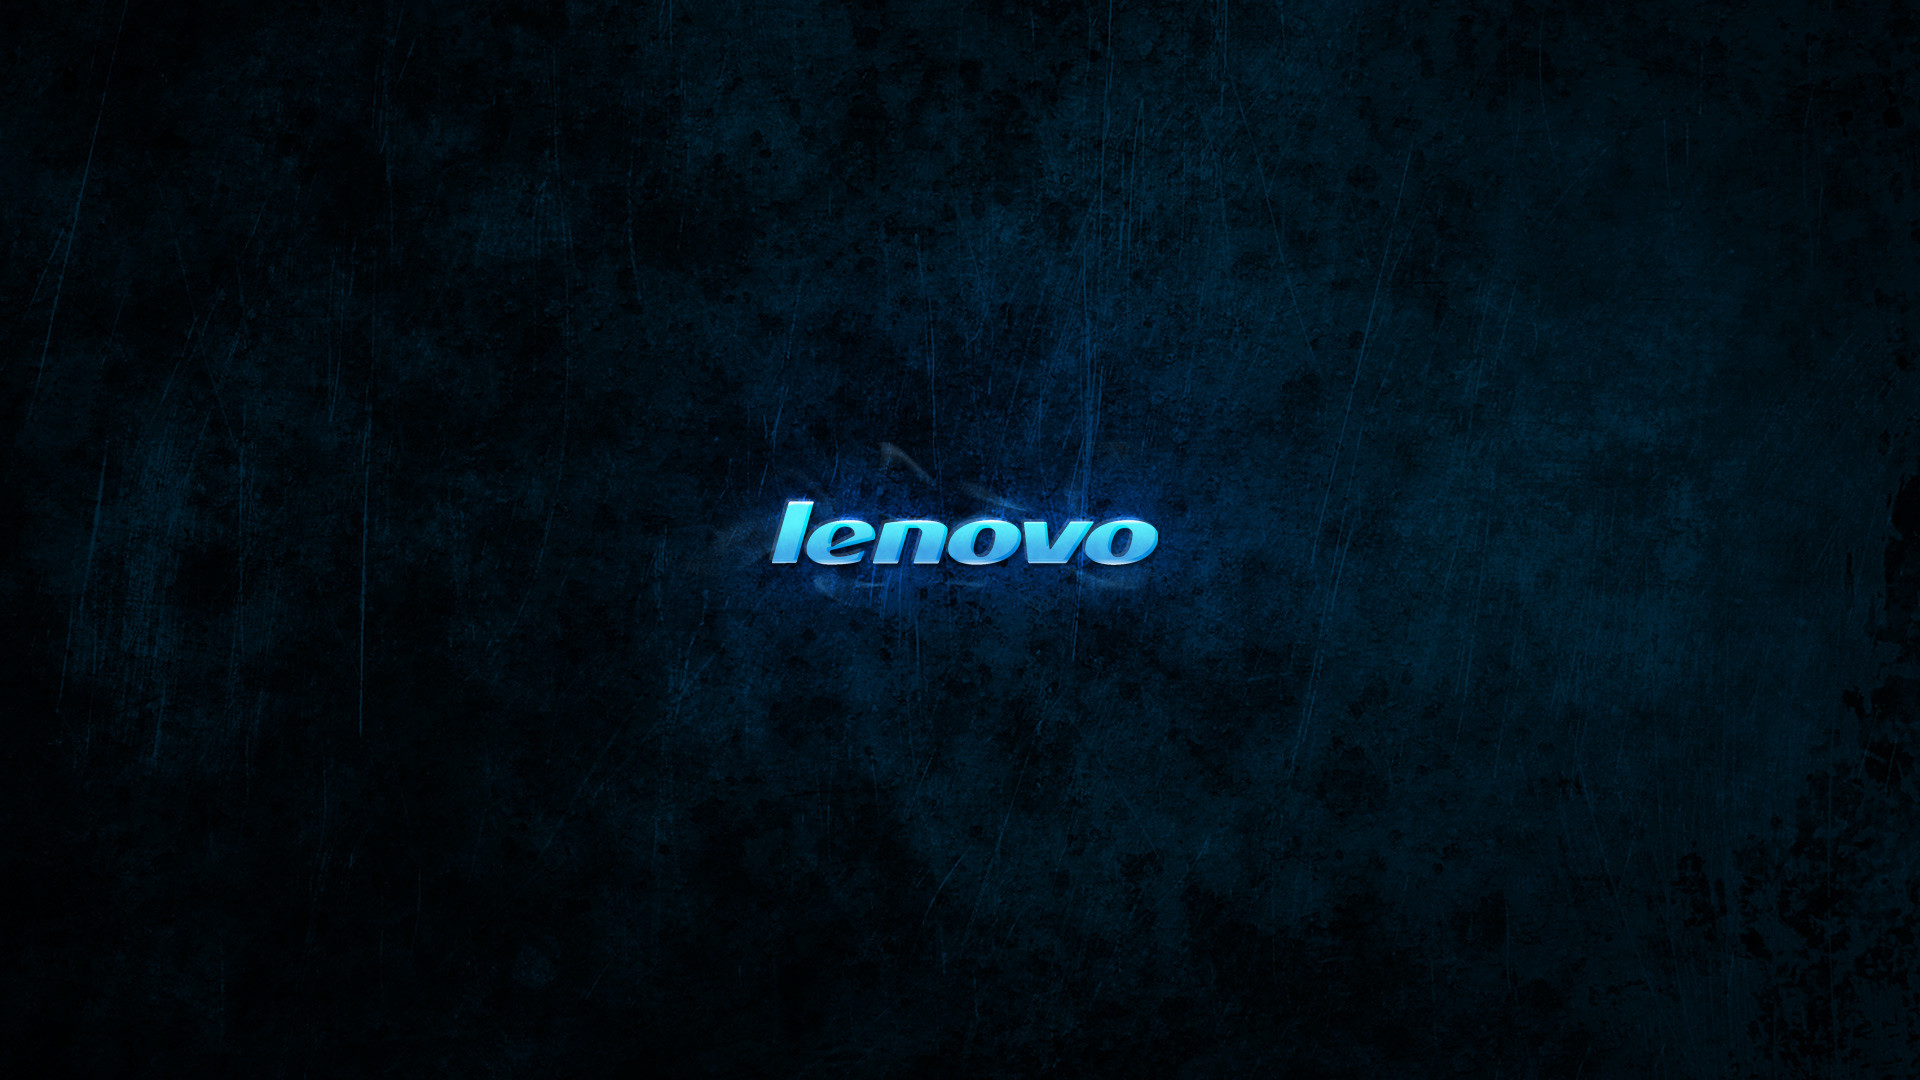 1920x1080 Download Lenovo Windows 8 Wallpapers pictures in high definition or .